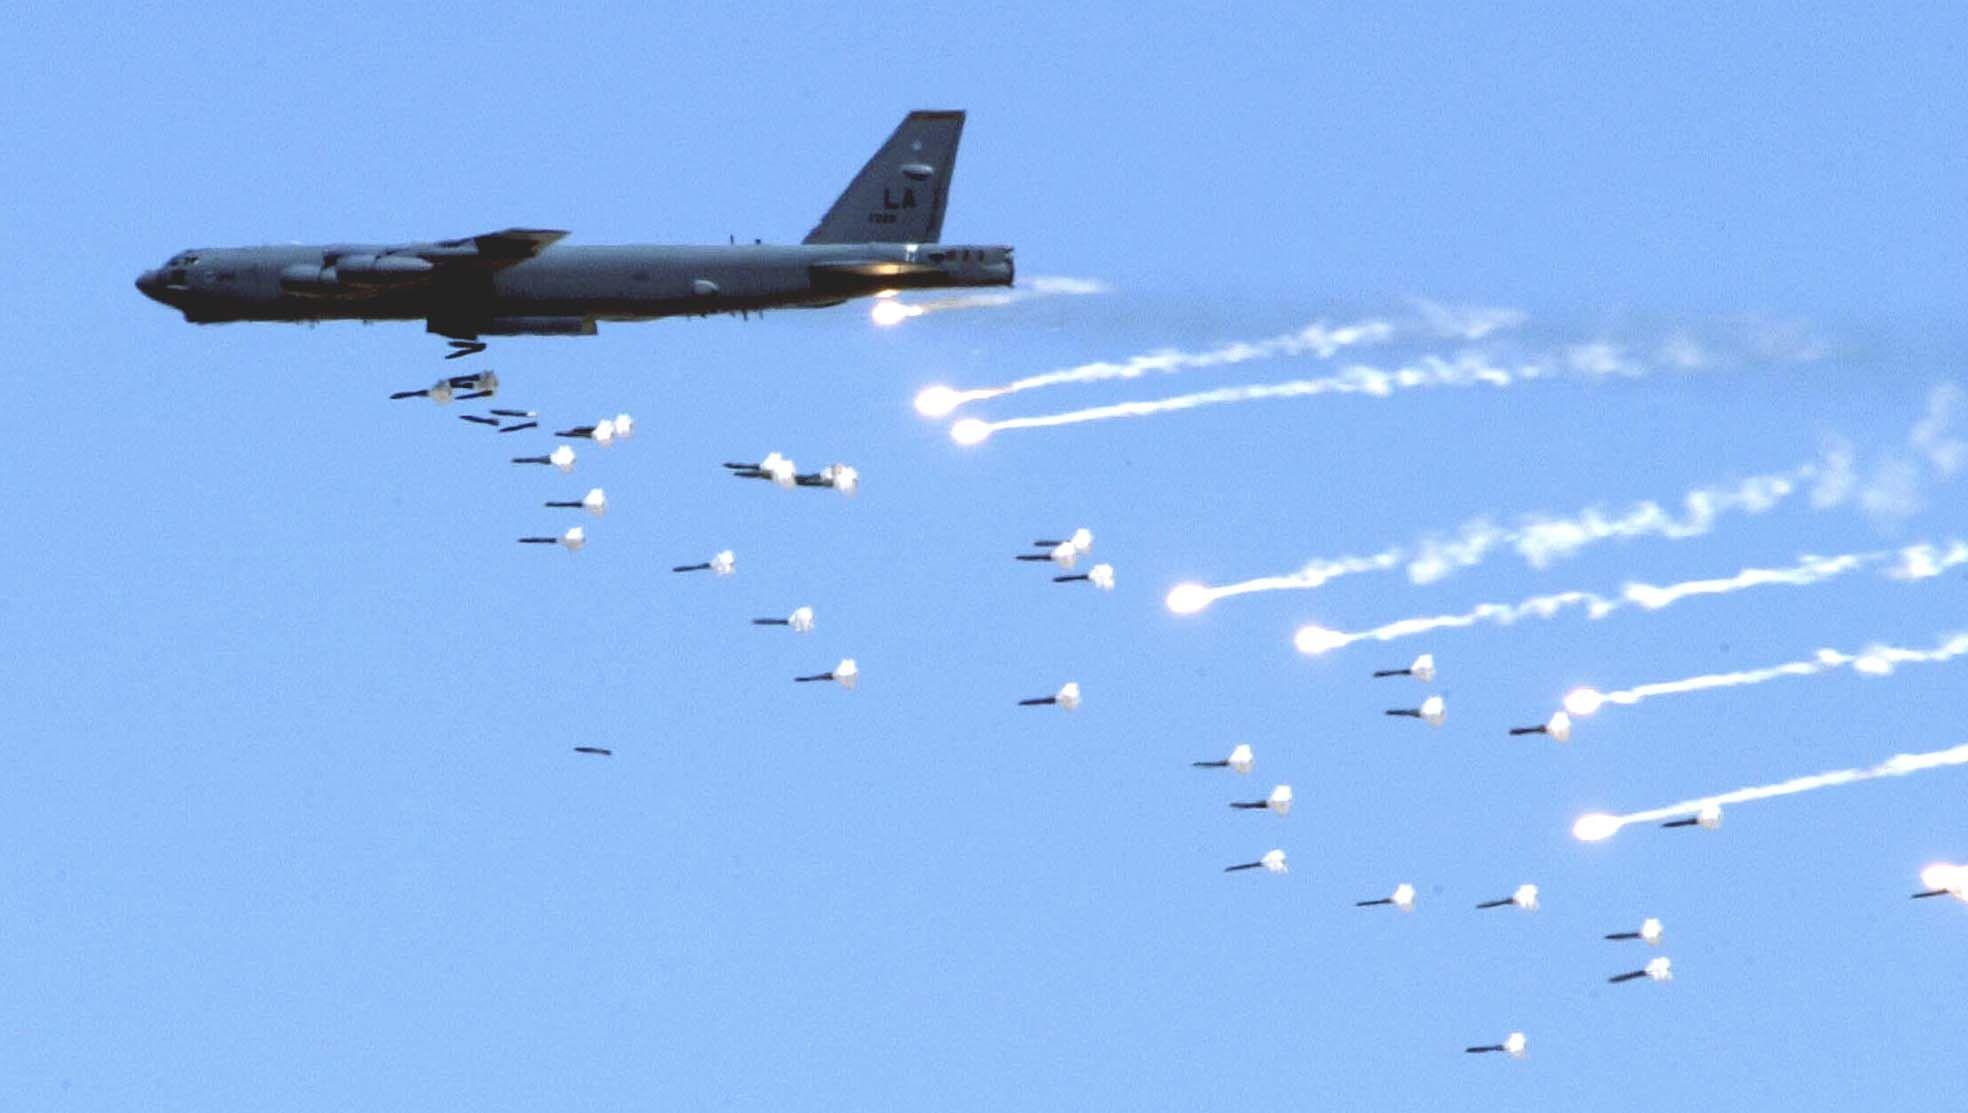 B 52 Stratofortress Dropping Bombs. Air Force Superiority